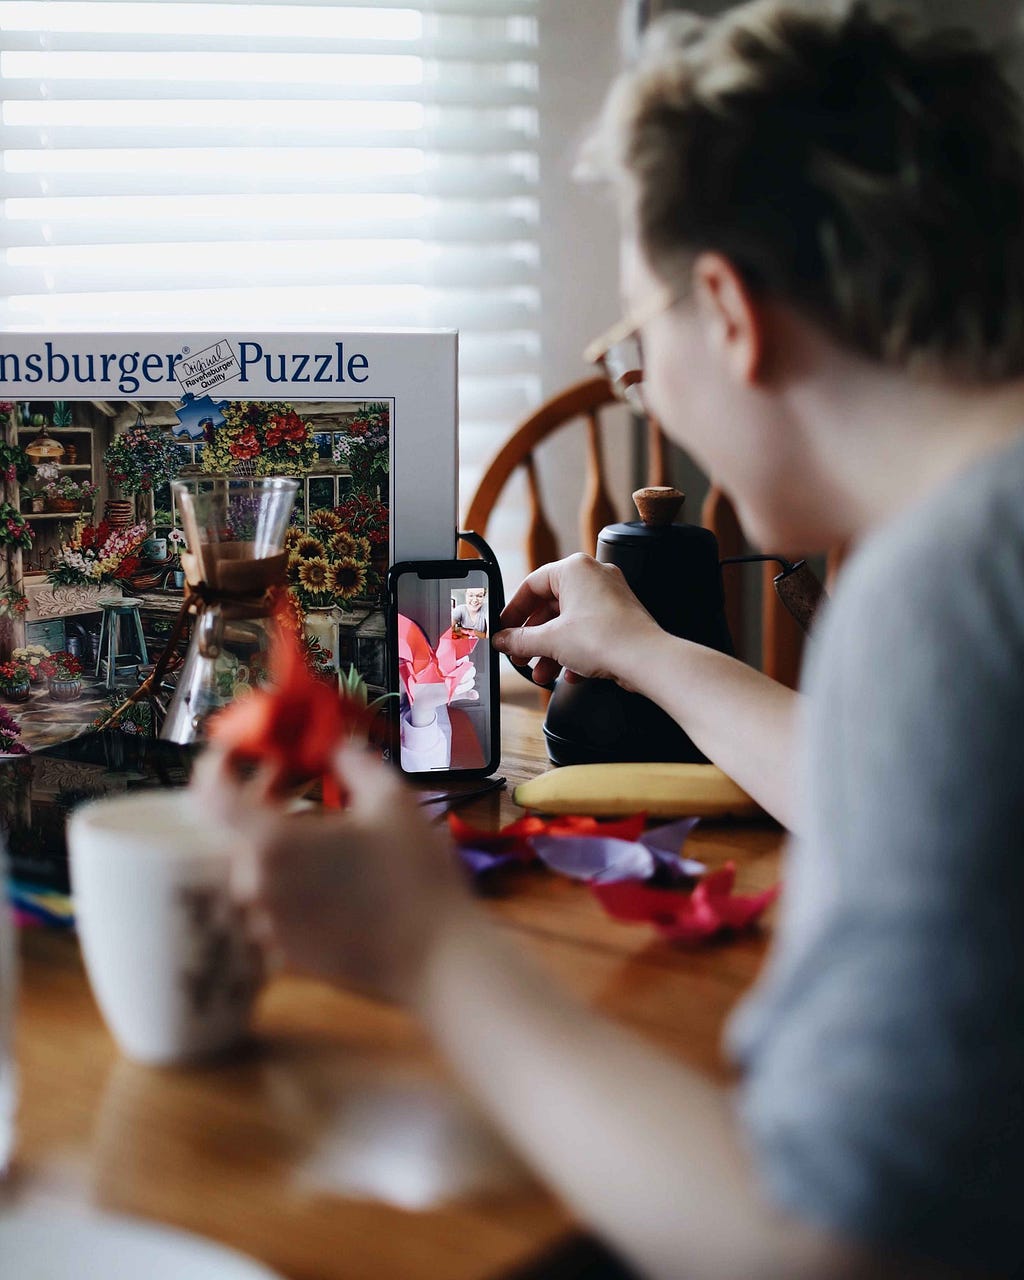 A young person sits at a cluttered desk, having a video call on their phone, which is propped up against a puzzle box.